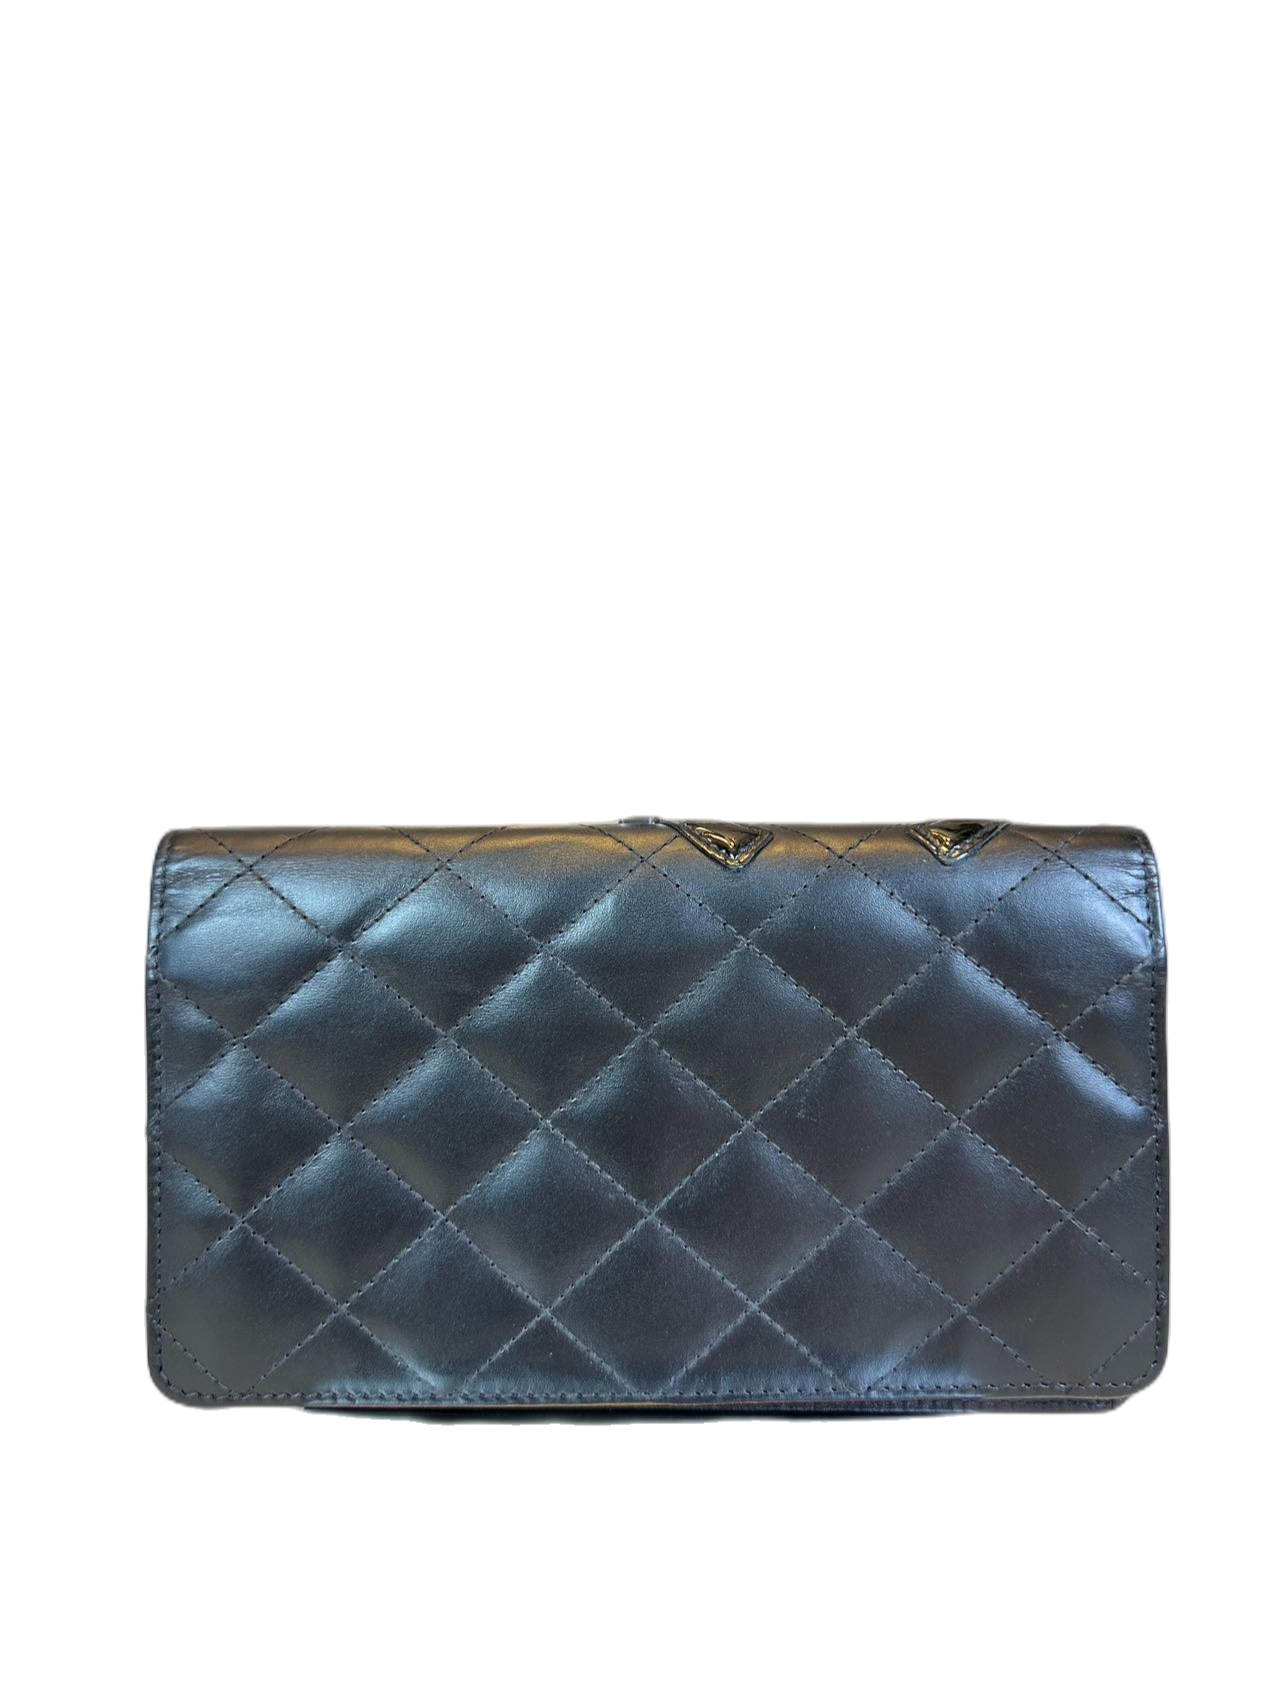 Preloved Chanel Black Leather C Logo Cambon Wallet